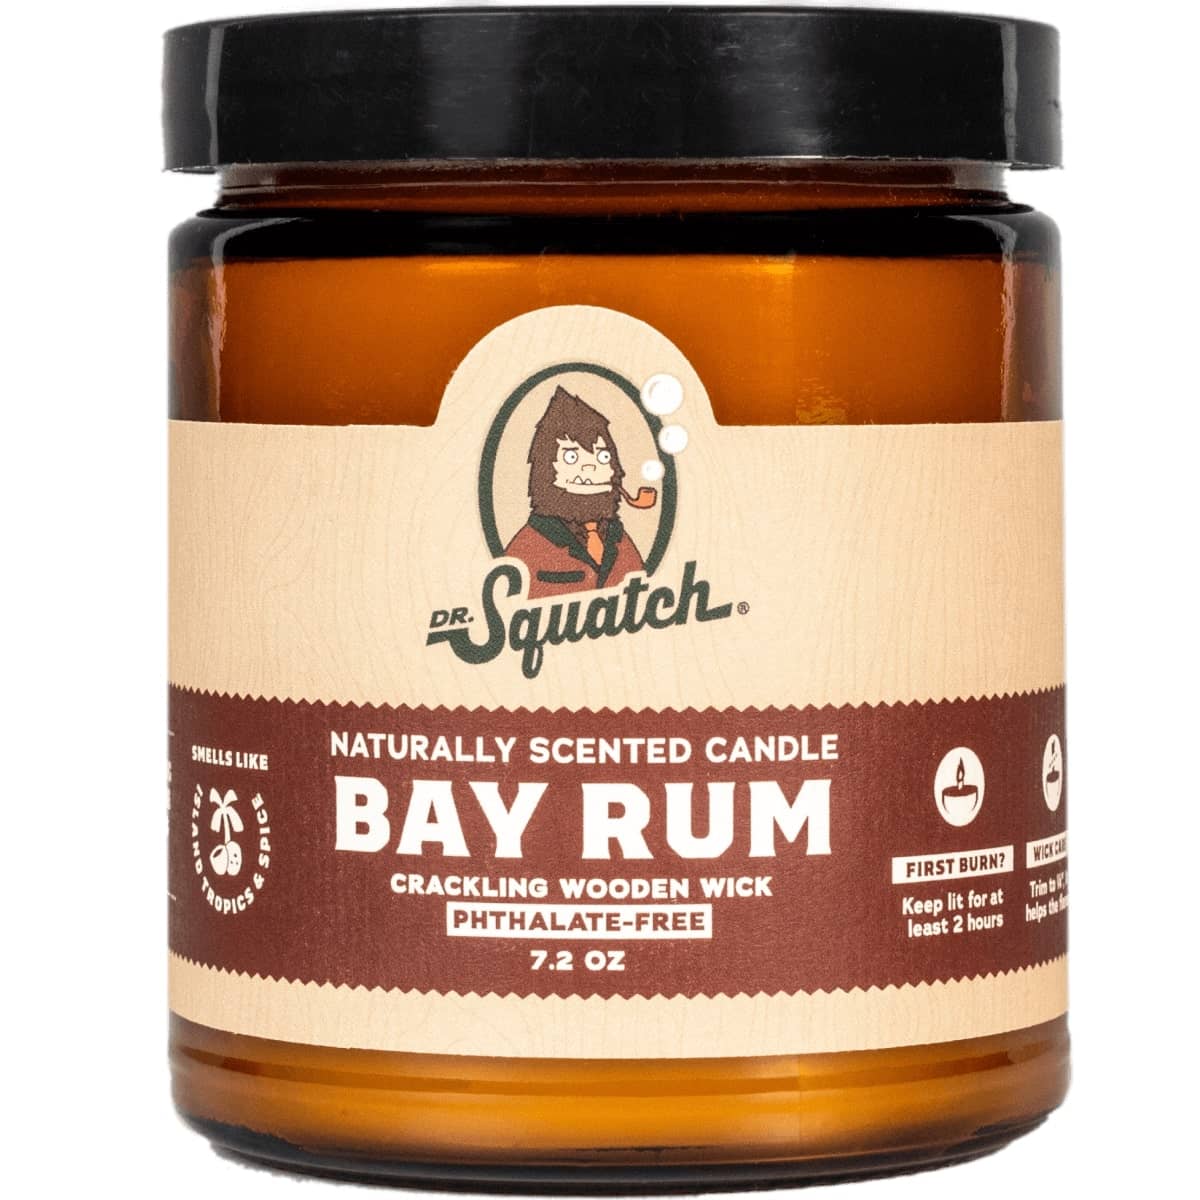 Bay Rum Candle